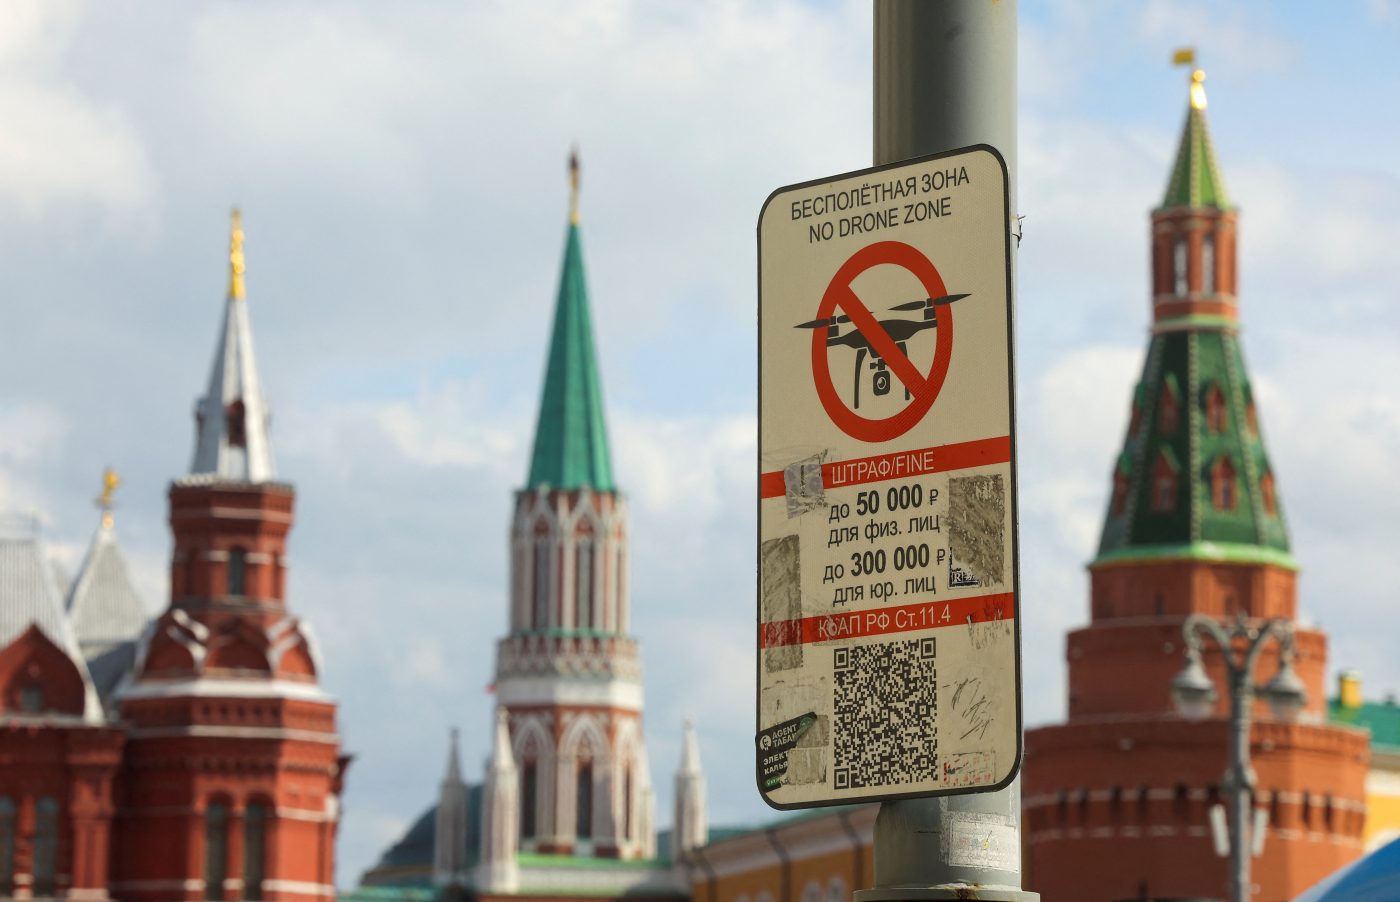 Photo: A sign prohibiting unmanned aerial vehicles flying over the area is on display near the State Historical Museum and the Kremlin wall in central Moscow, Russia, May 3, 2023. Credit: REUTERS/Evgenia Novozhenina 